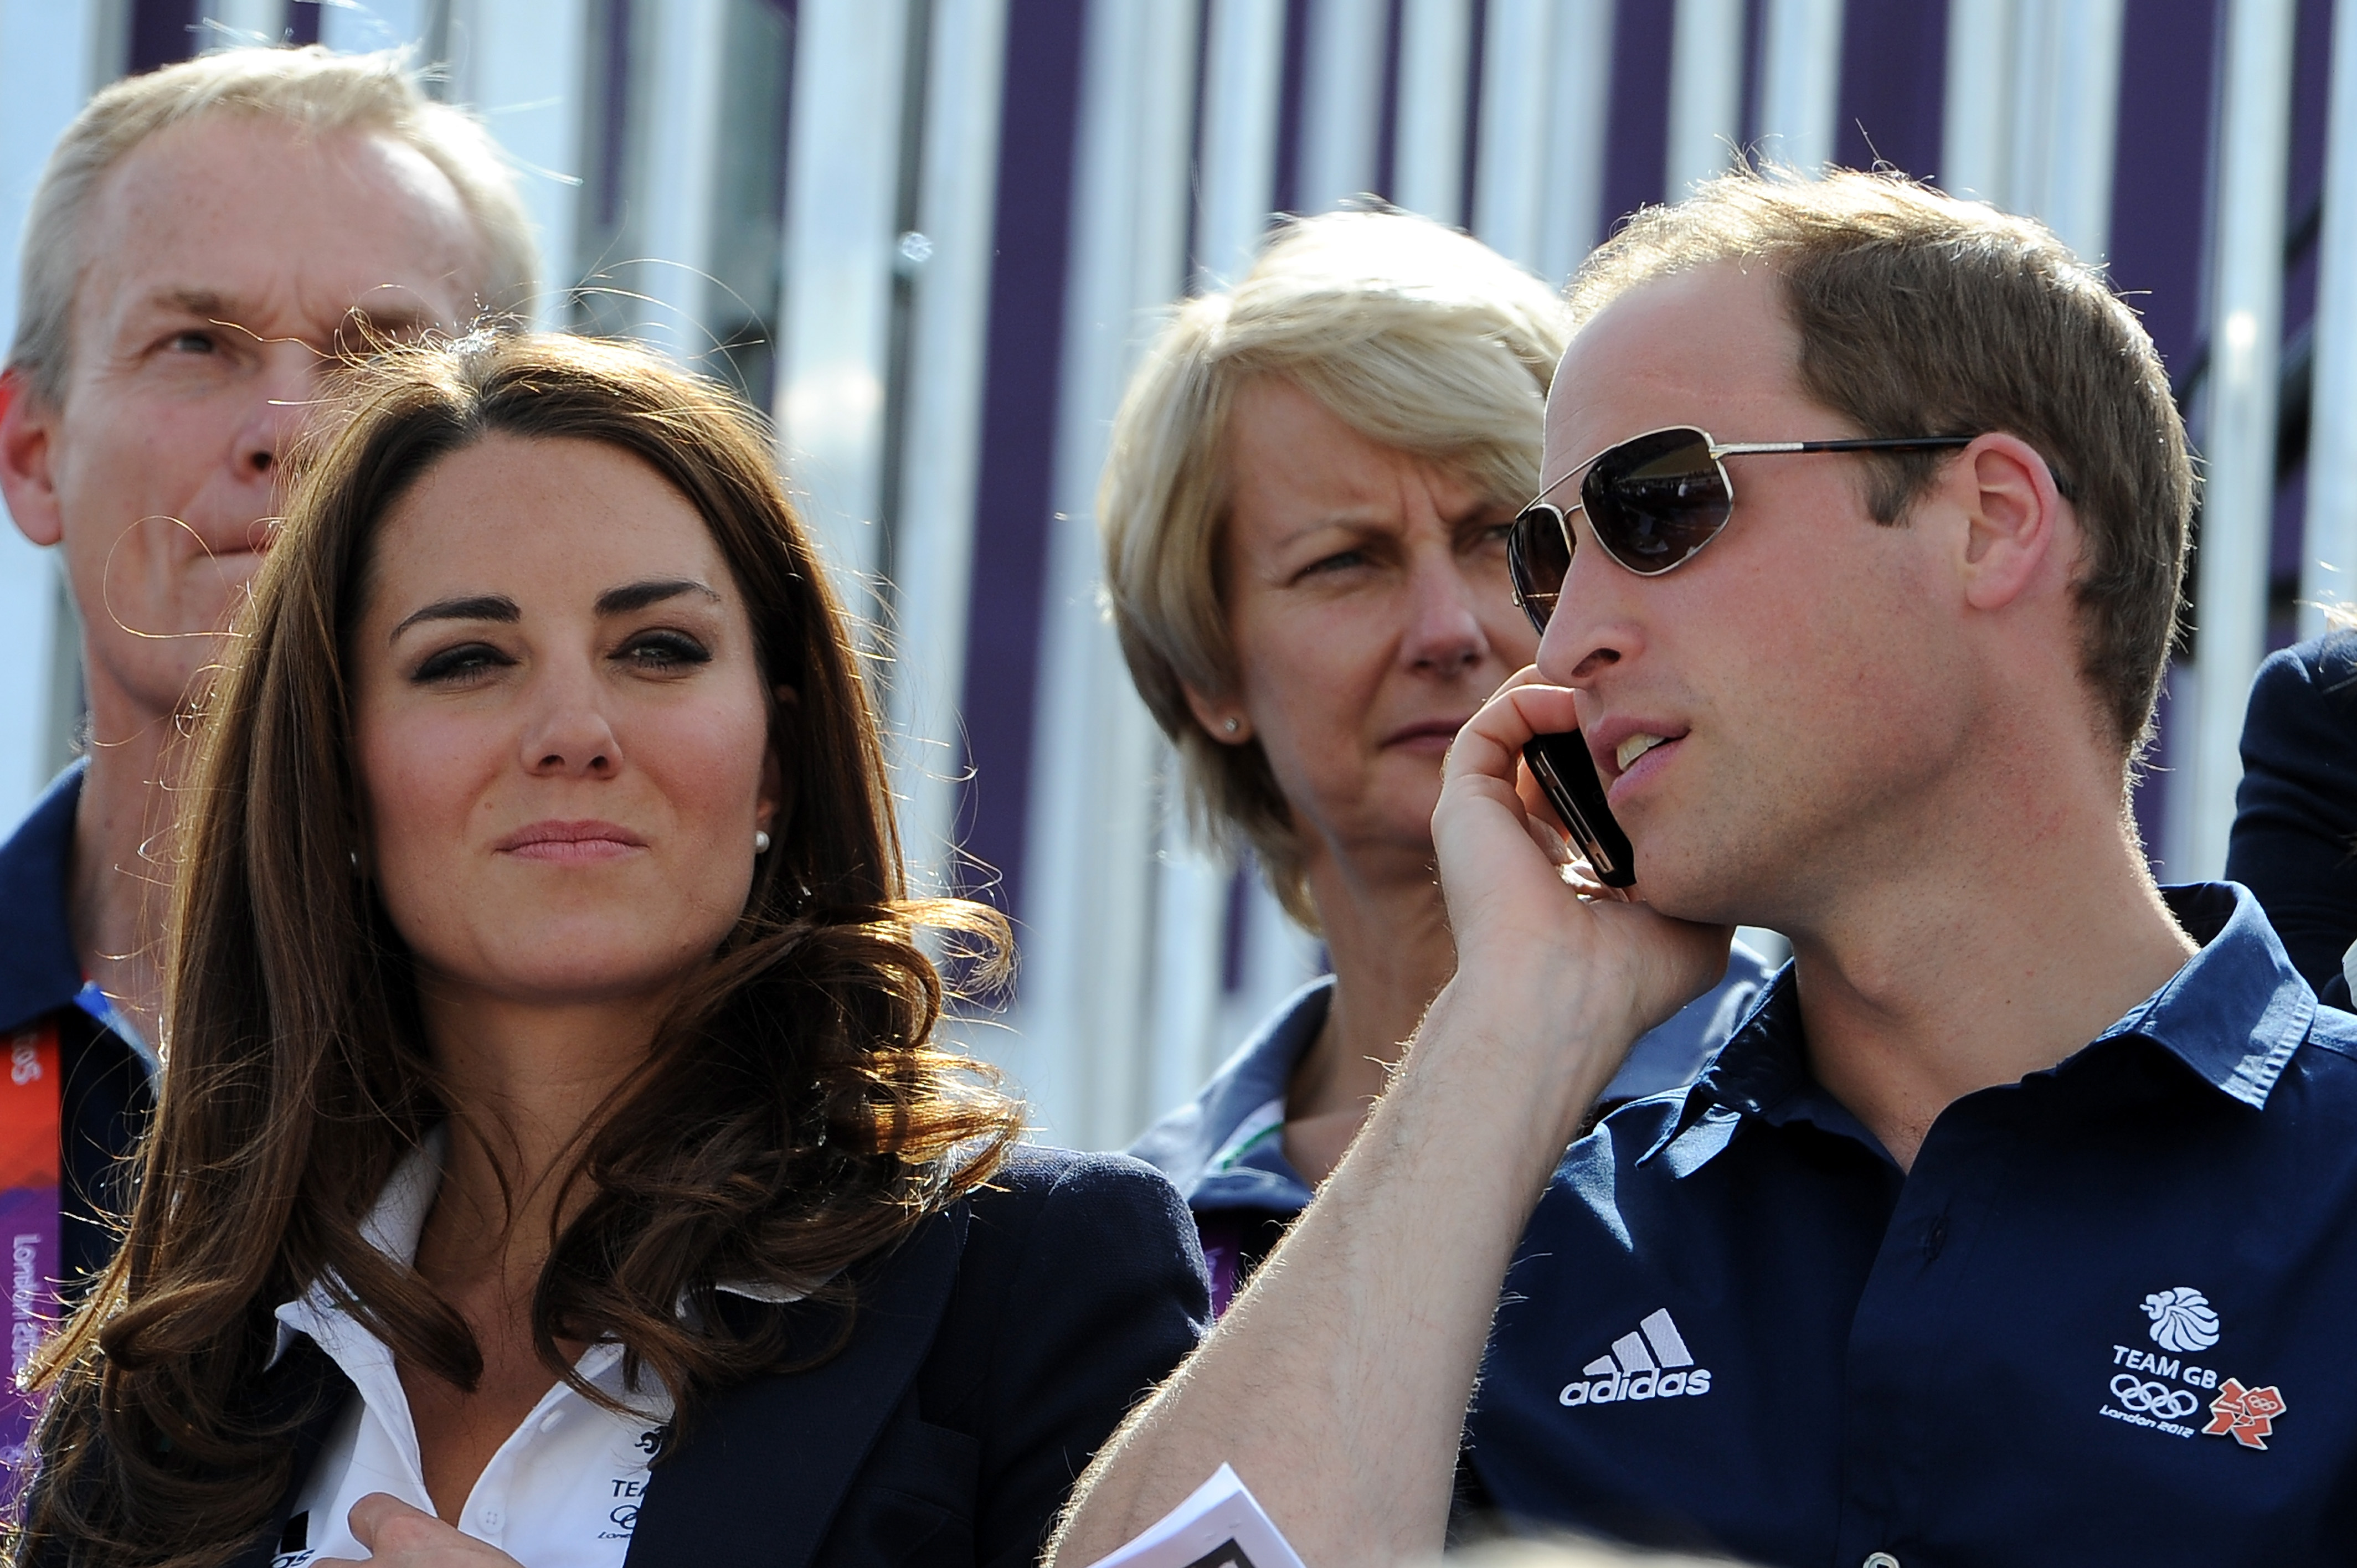 Kate Middleton and Prince William at the Eventing Cross Country Equestrian event in London, England on July 30, 2012 | Source: Getty Images